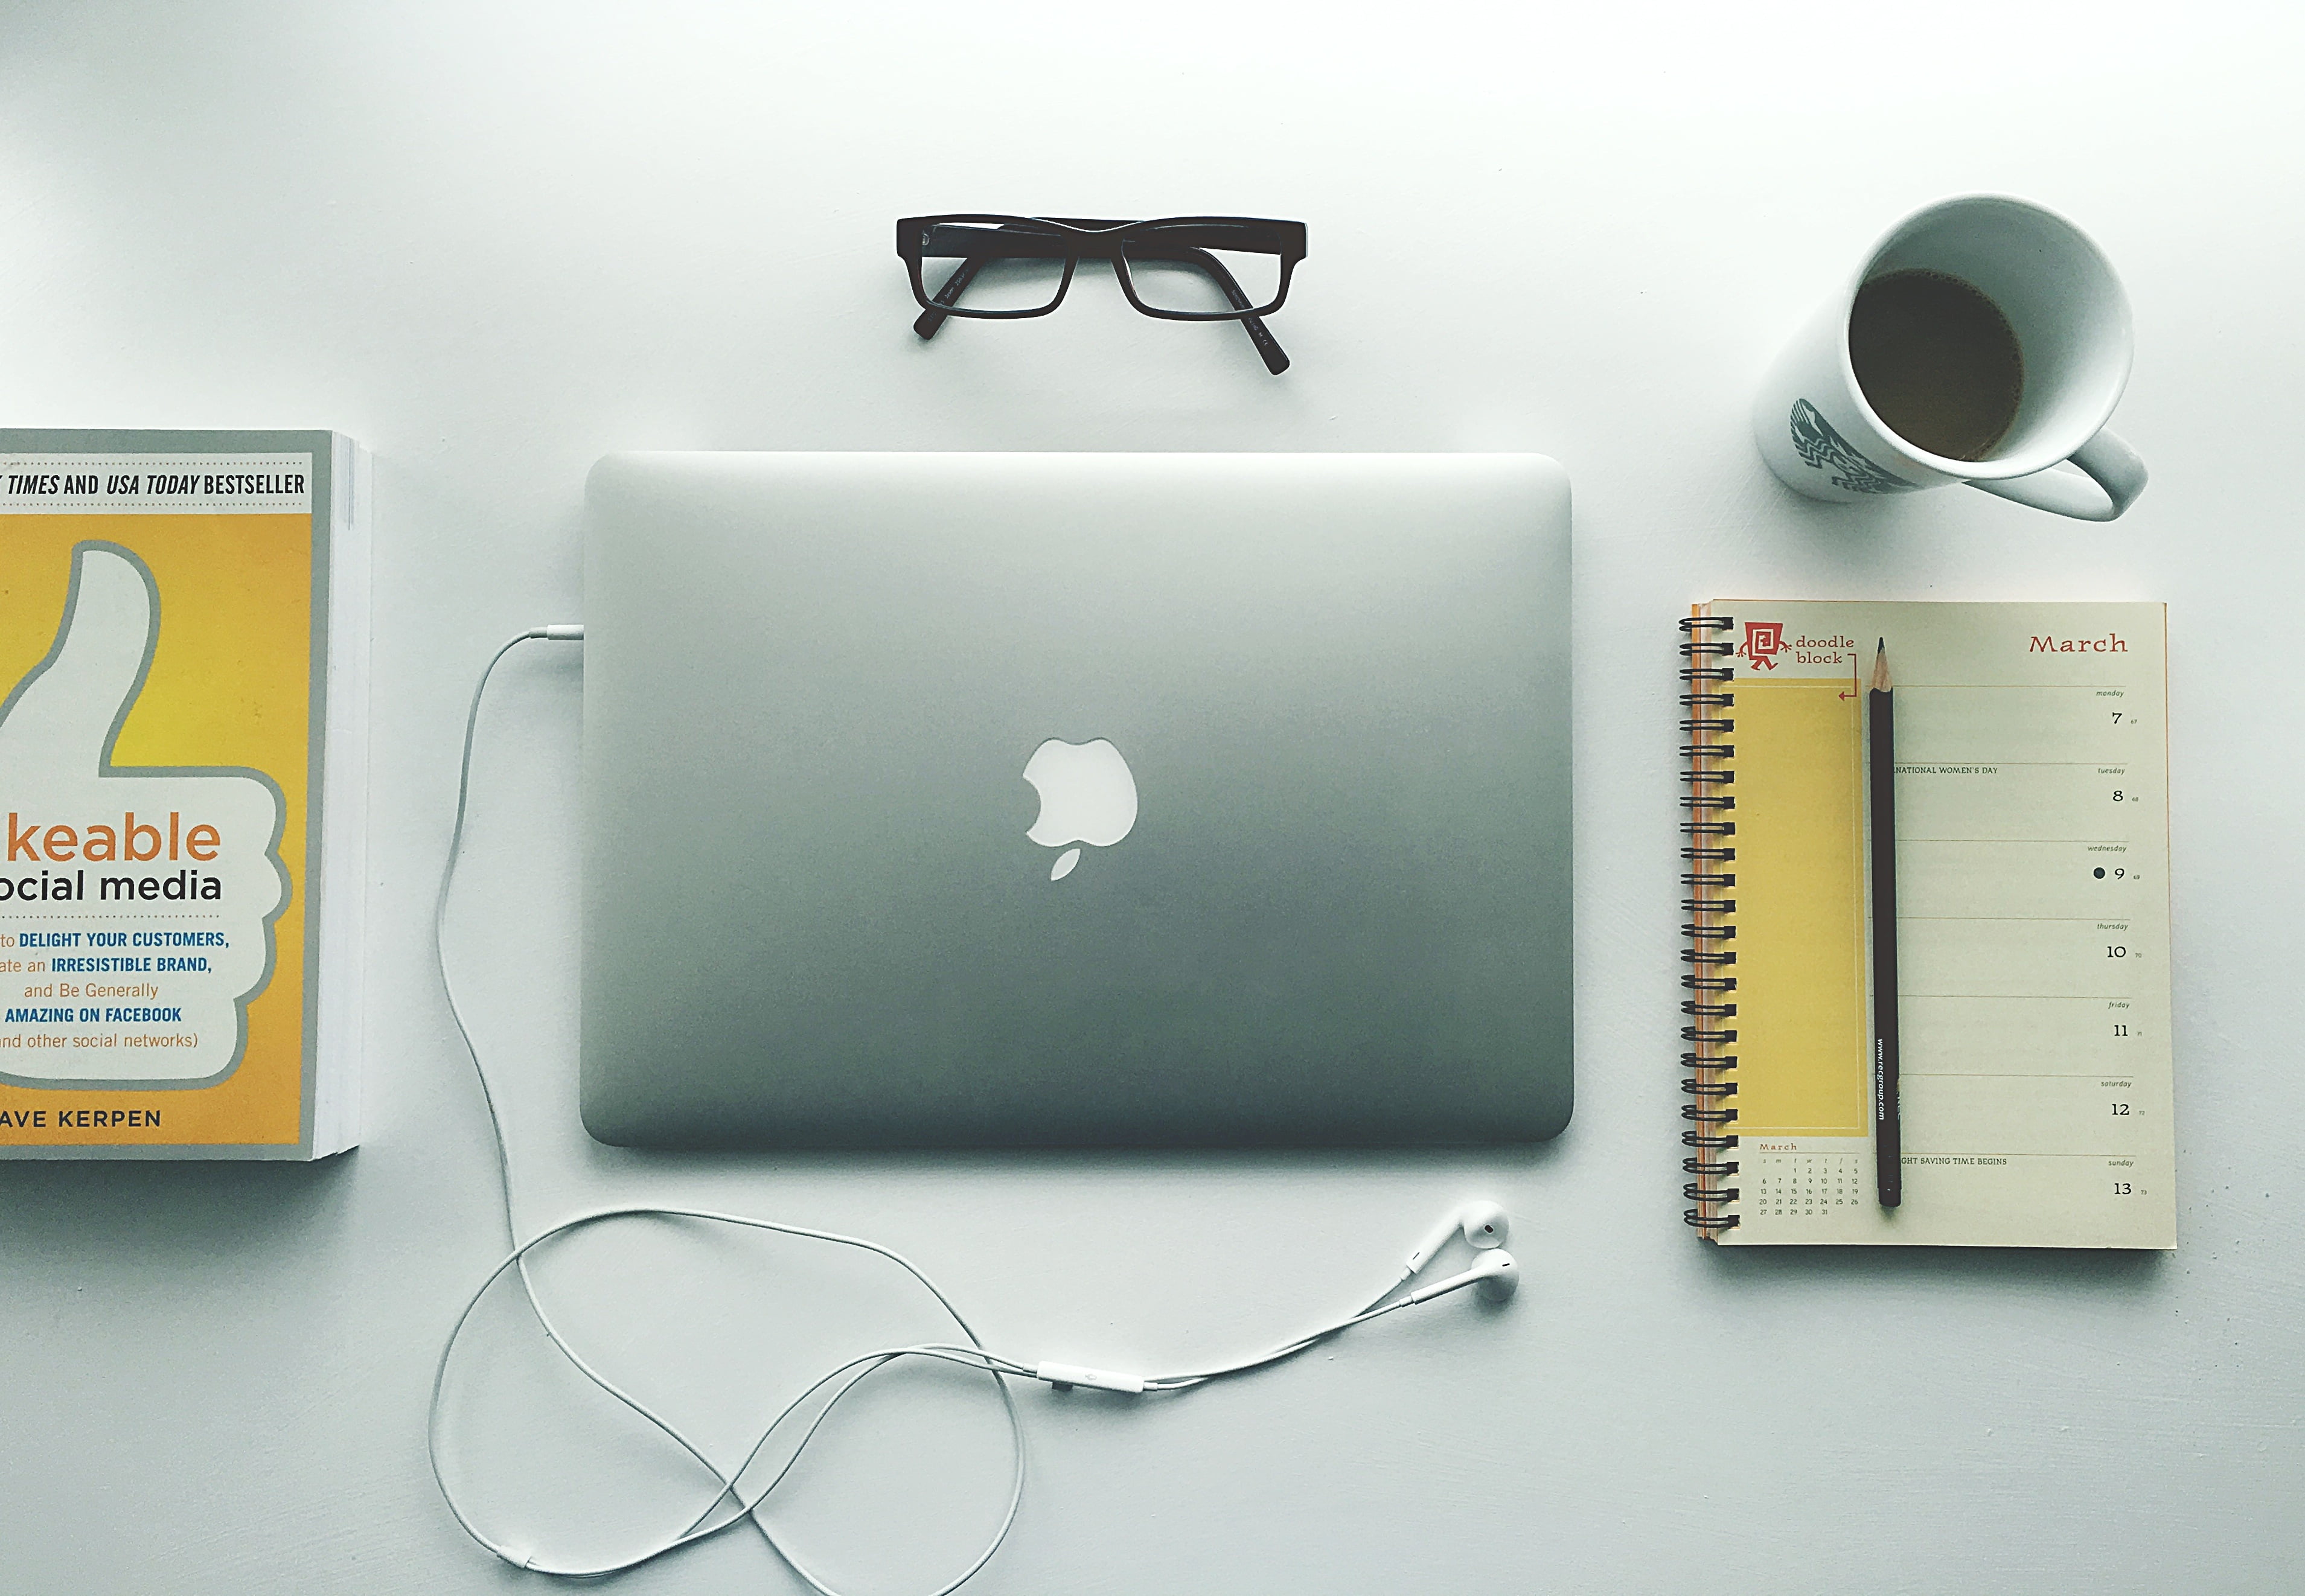 silver MacBook placed next to spring notebook and black framed eyeglasses